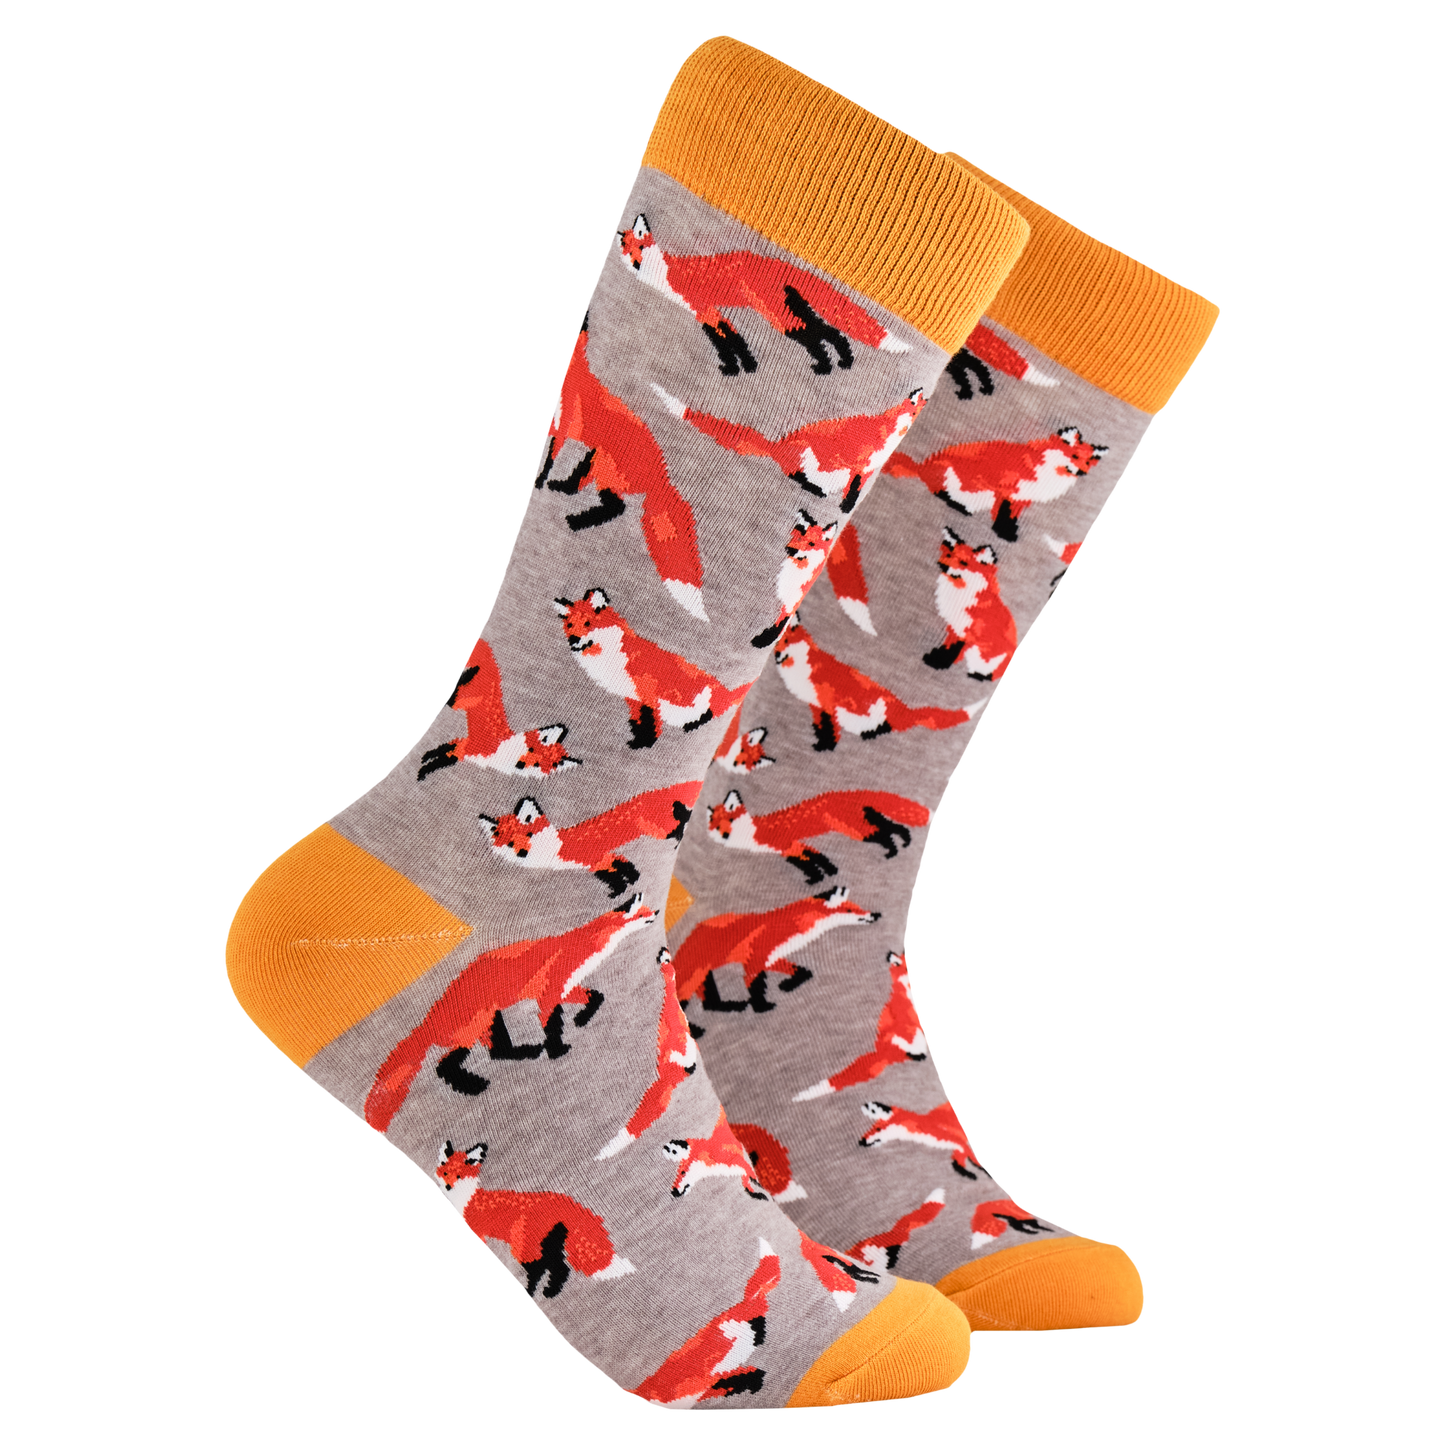 Foxes Socks. A pair of socks depicting playful foxes. Grey legs, orange cuff, heel and toe.